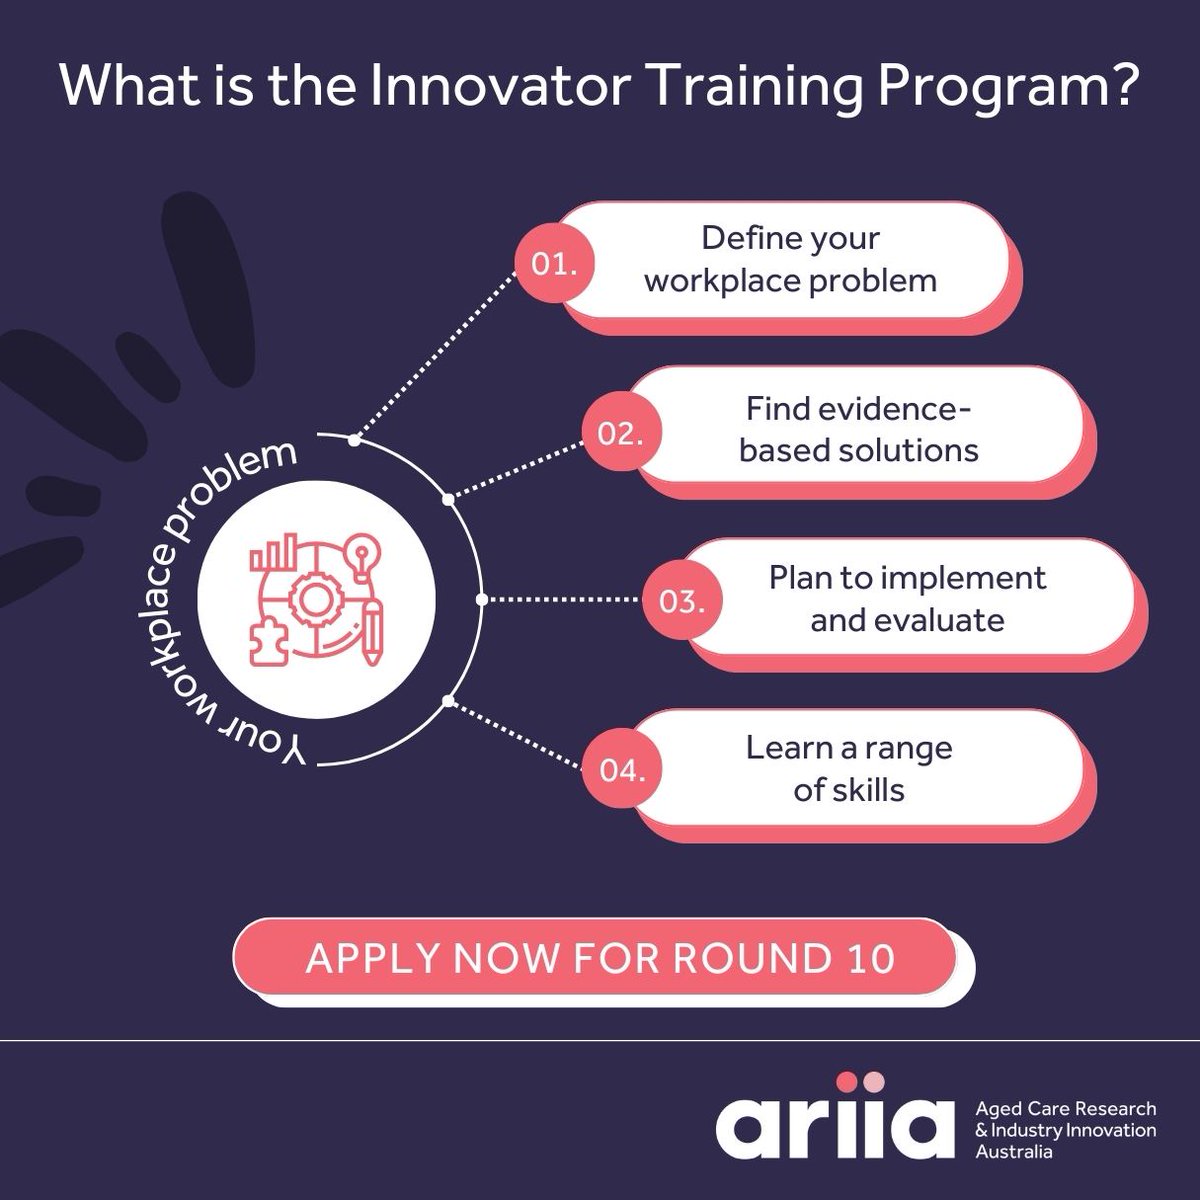 The ARIIA Innovator Training Program has supported hundreds of aged care workers and their managers to solve workplace problems with evidence-based solutions. We are currently accepting applications for the Round 10 training. Find out more zurl.co/Vx1G